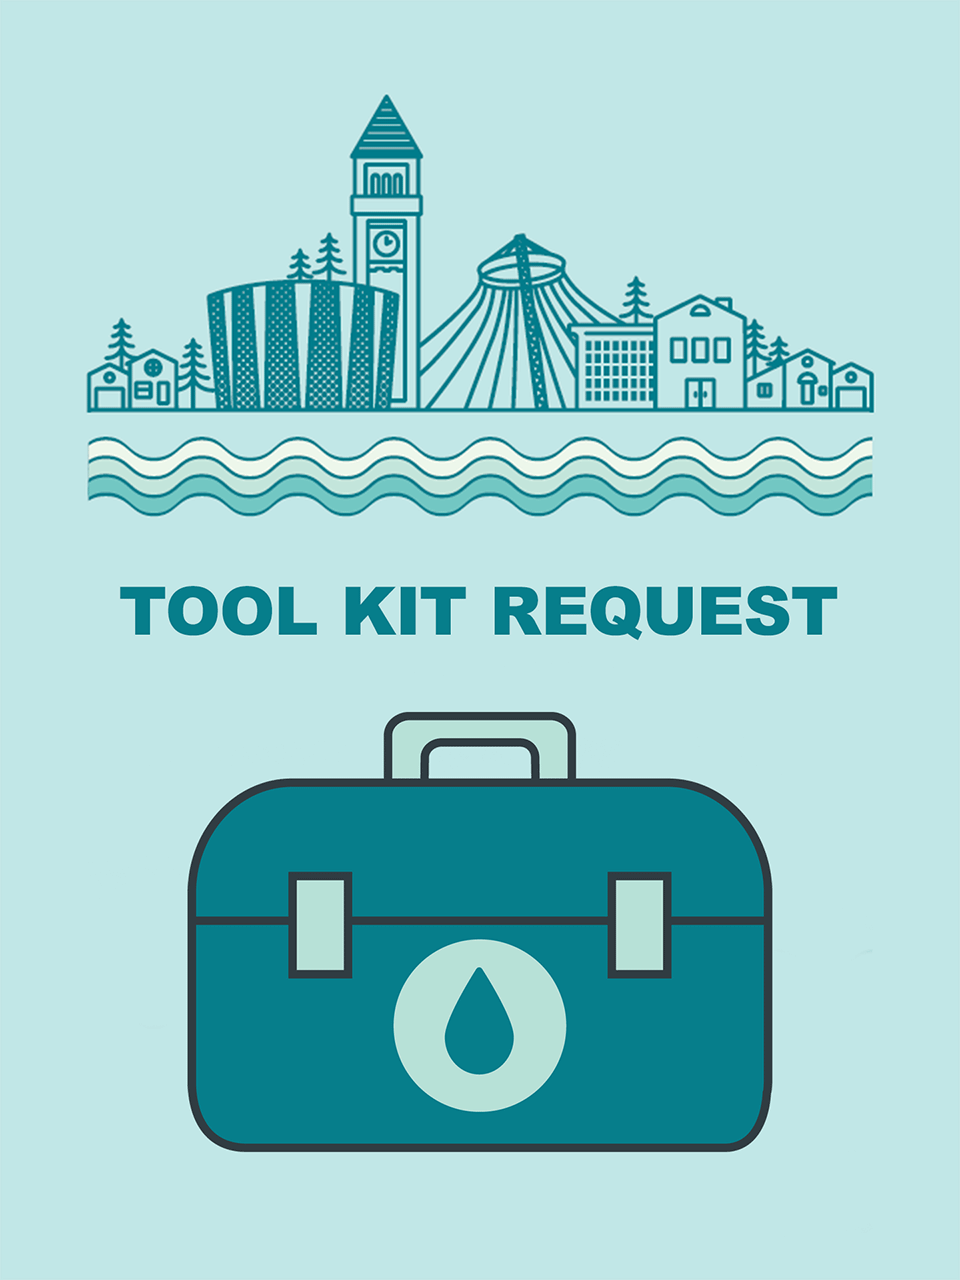 Water Wise Education Tool Kit Request